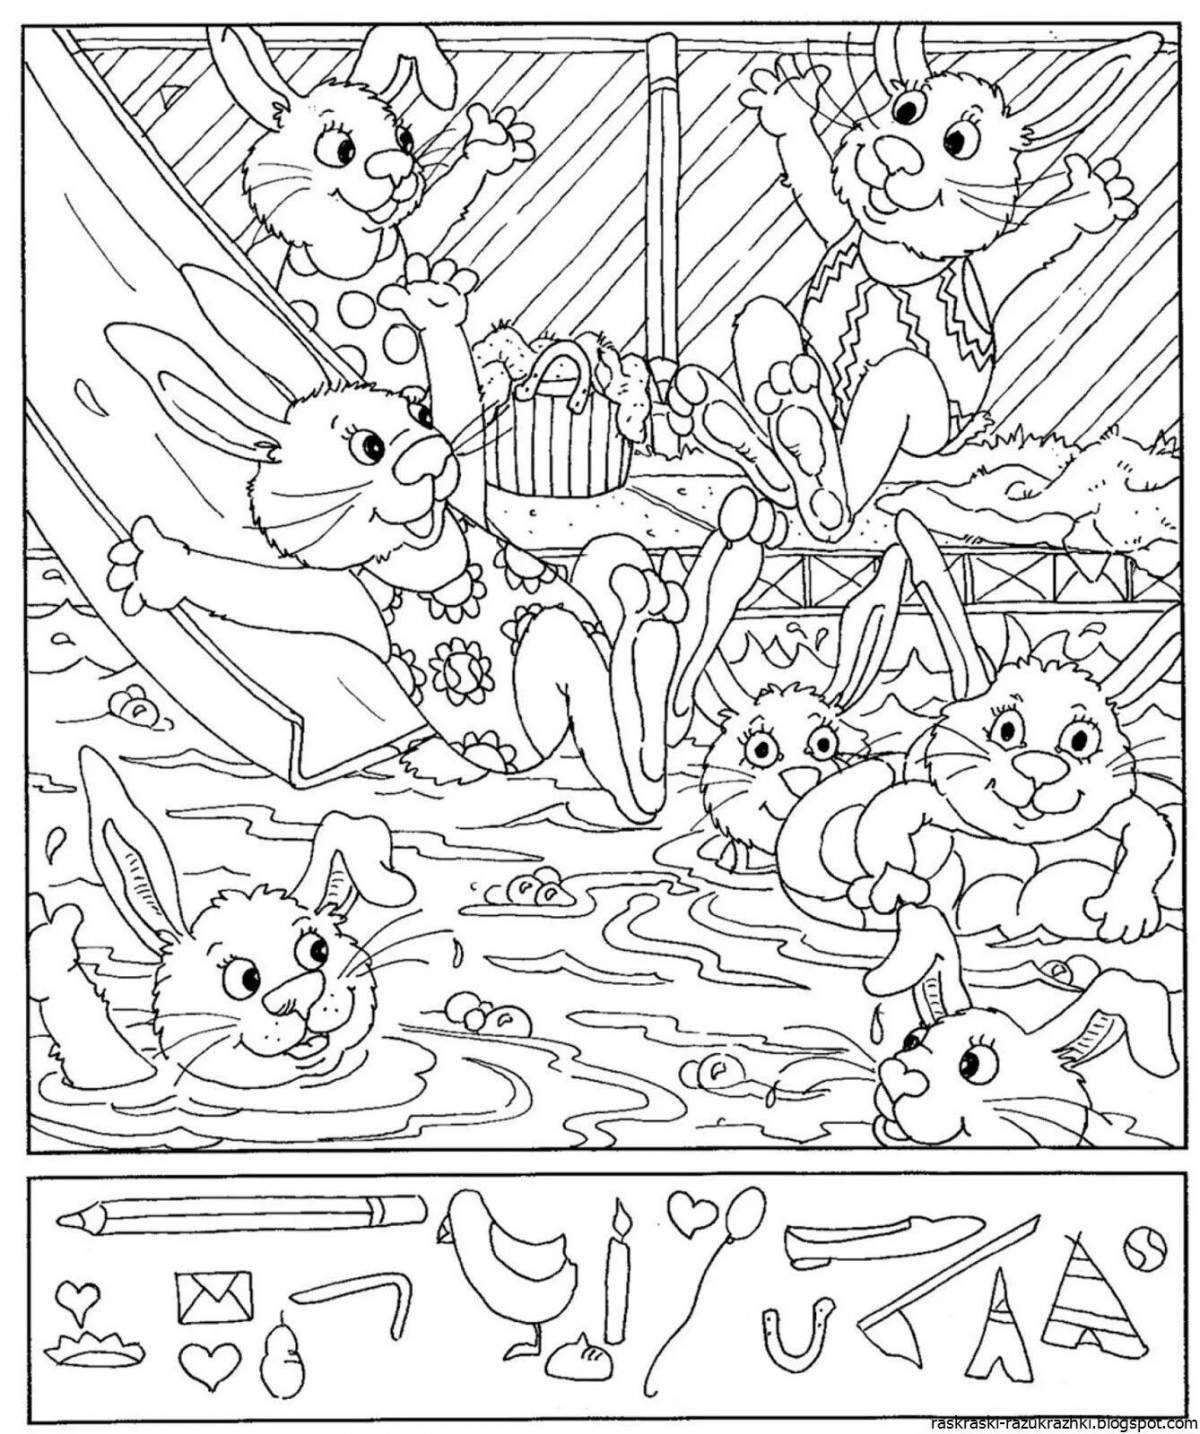 Entertaining coloring find the object